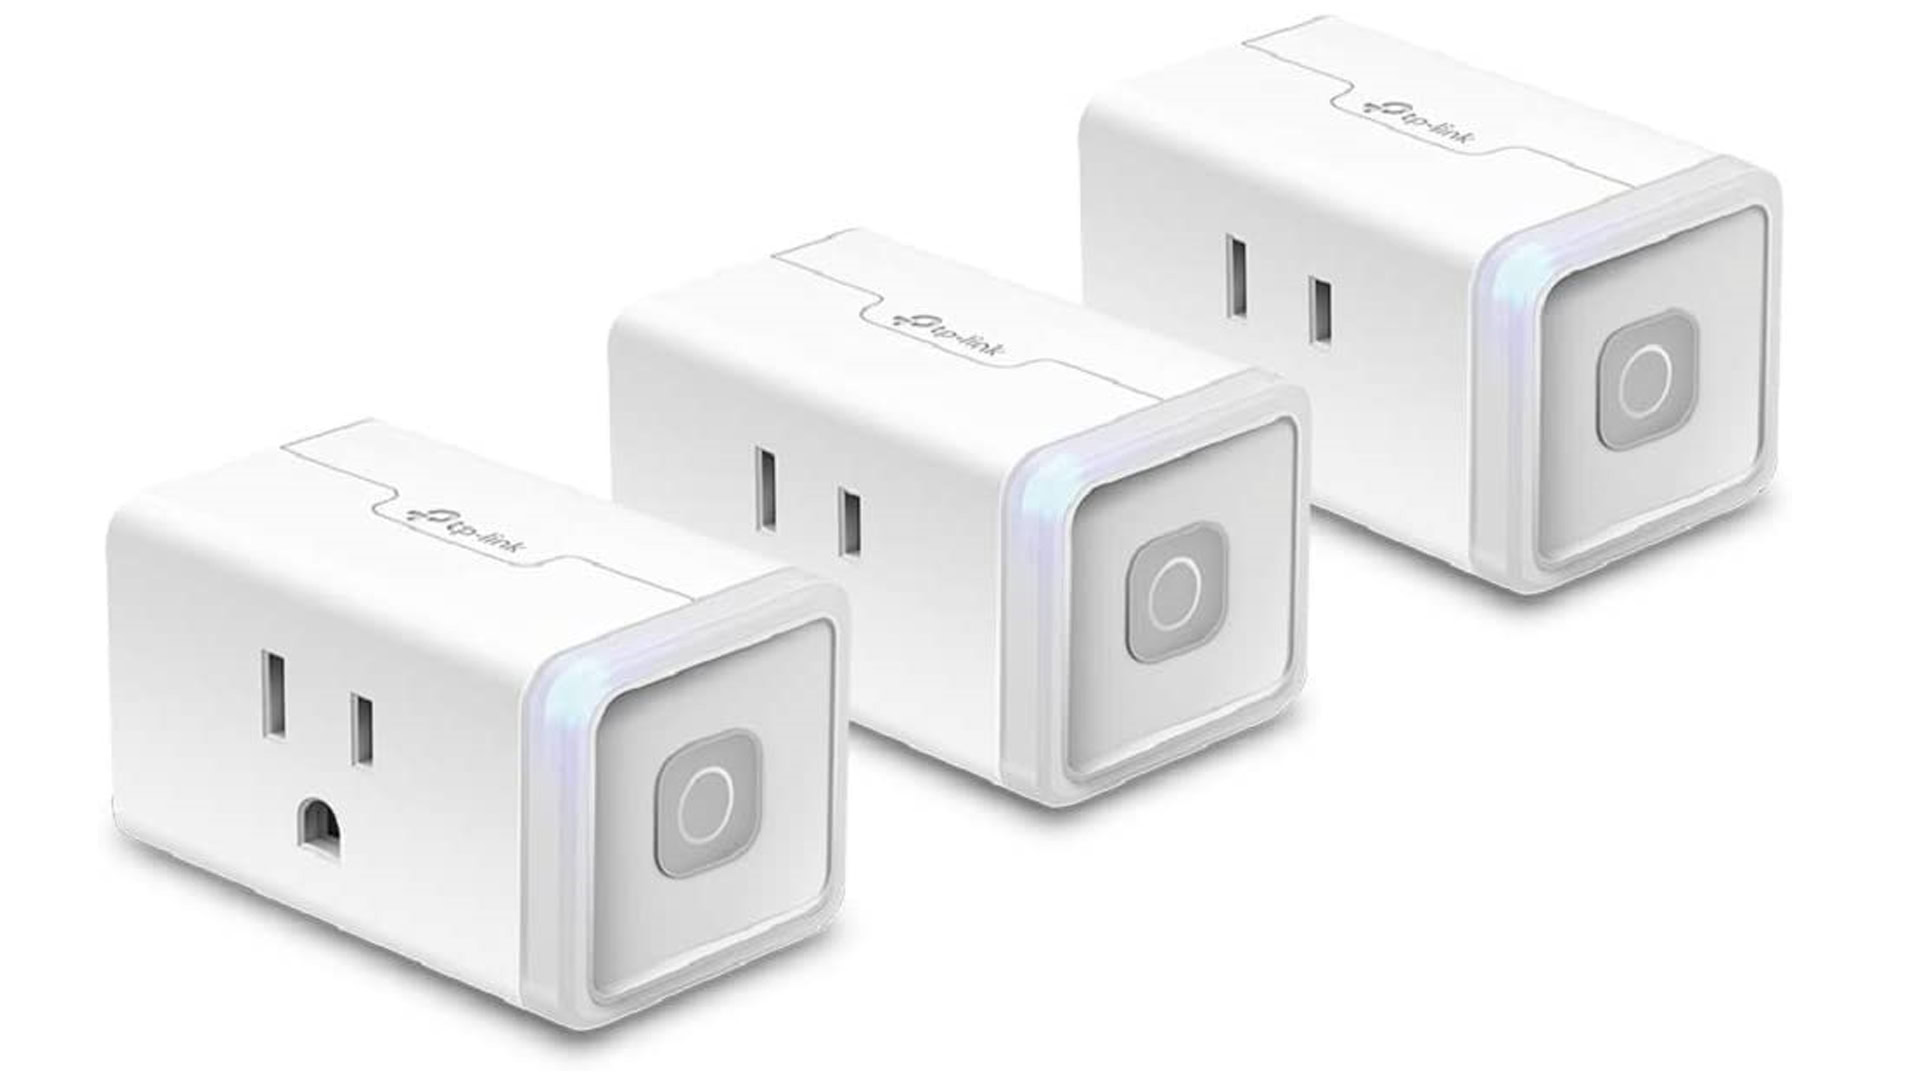 These Govee Wifi plugs turn any outlet into a smart outlet. You